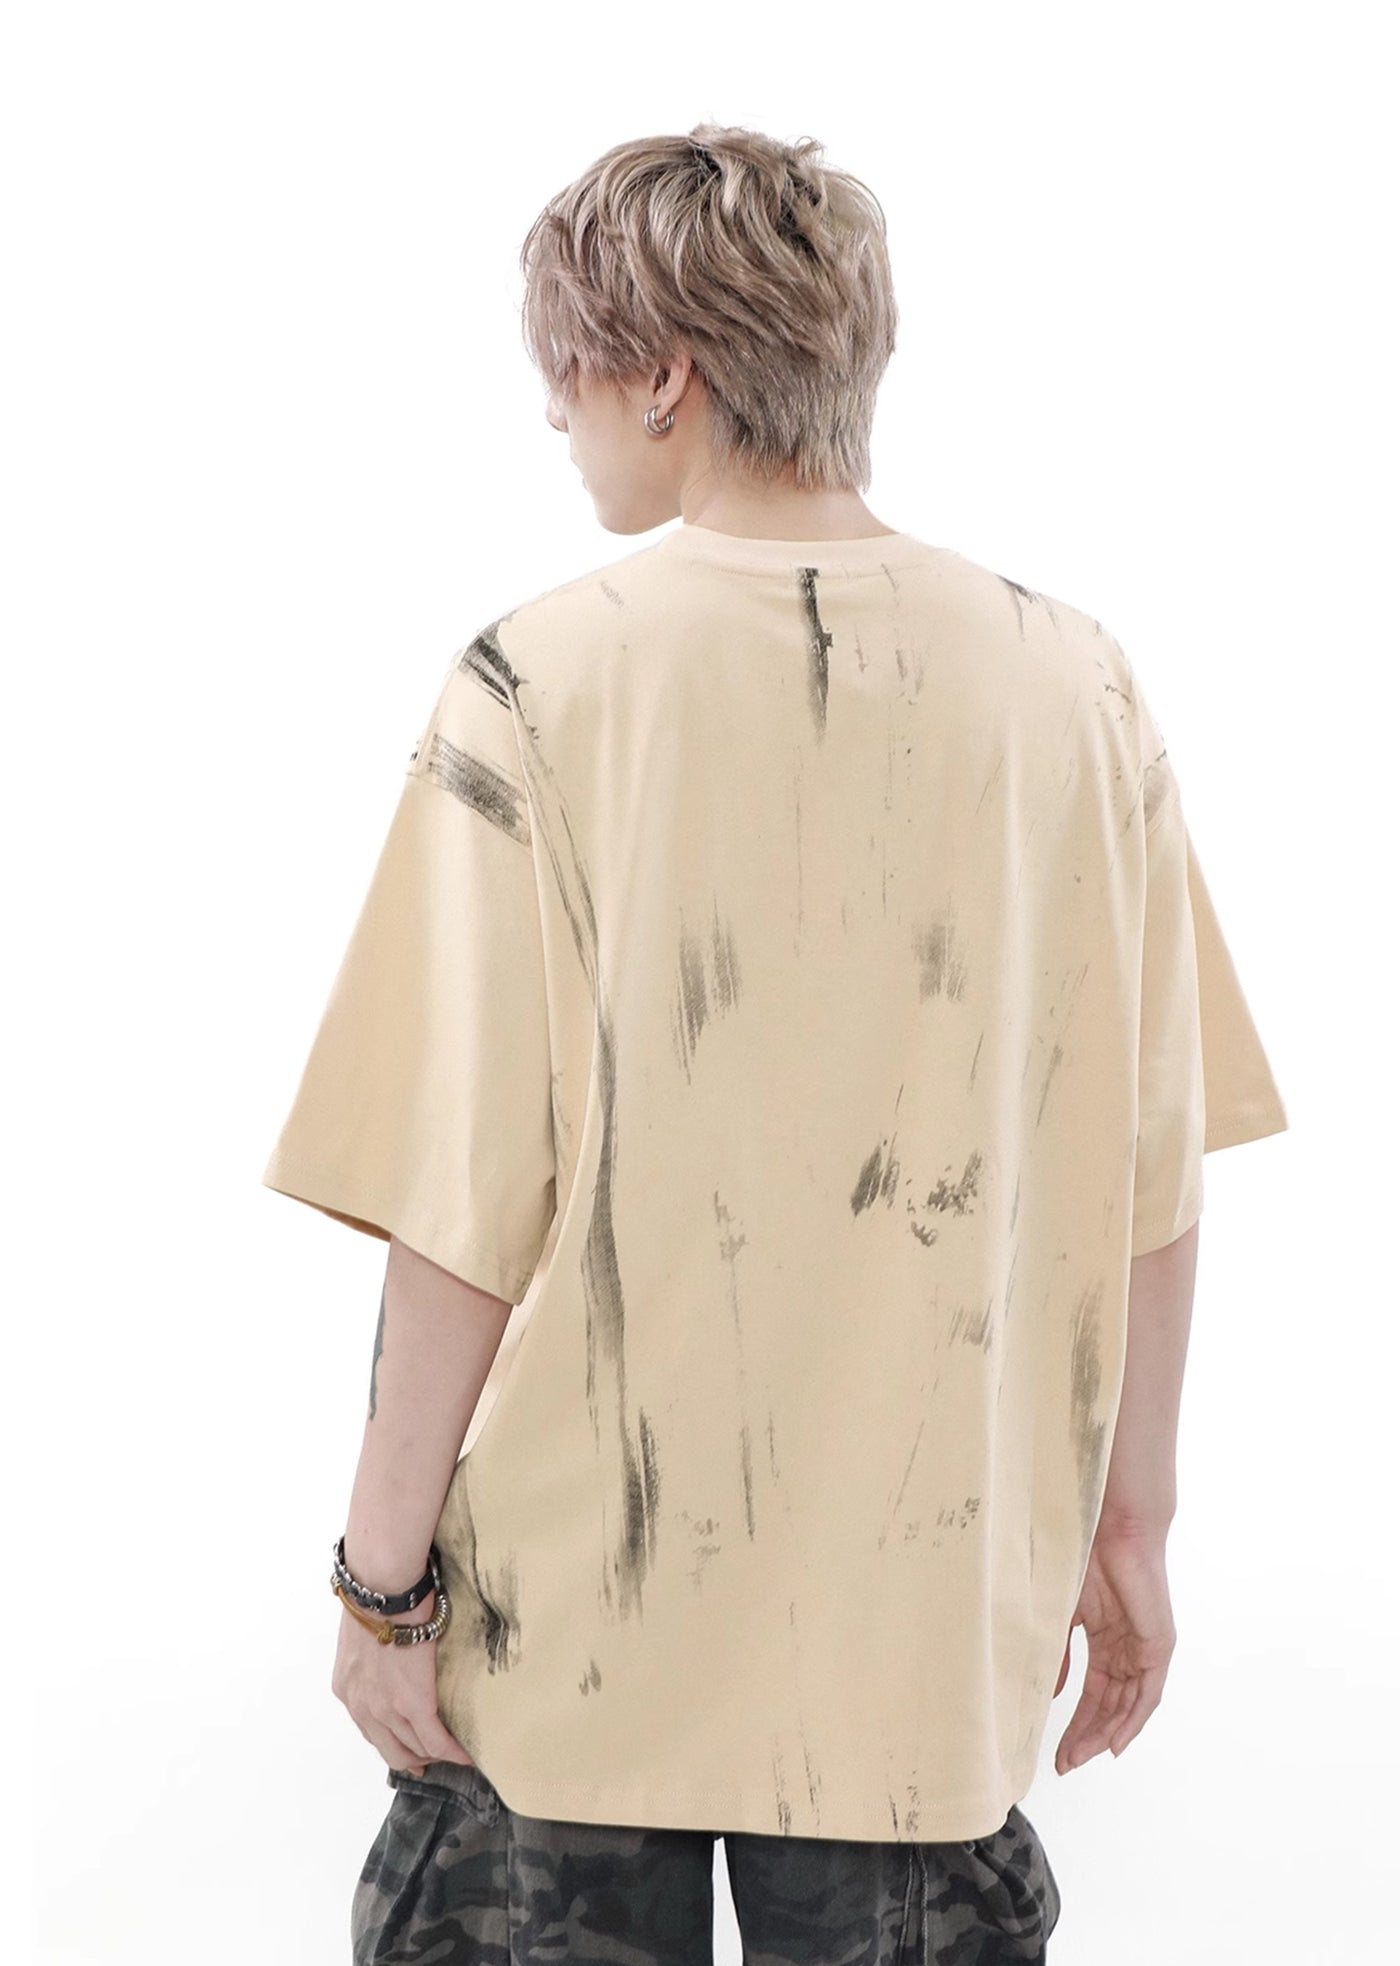 【MR nearly】Overall washed dull finish double collar short sleeve T-shirt  MR0110